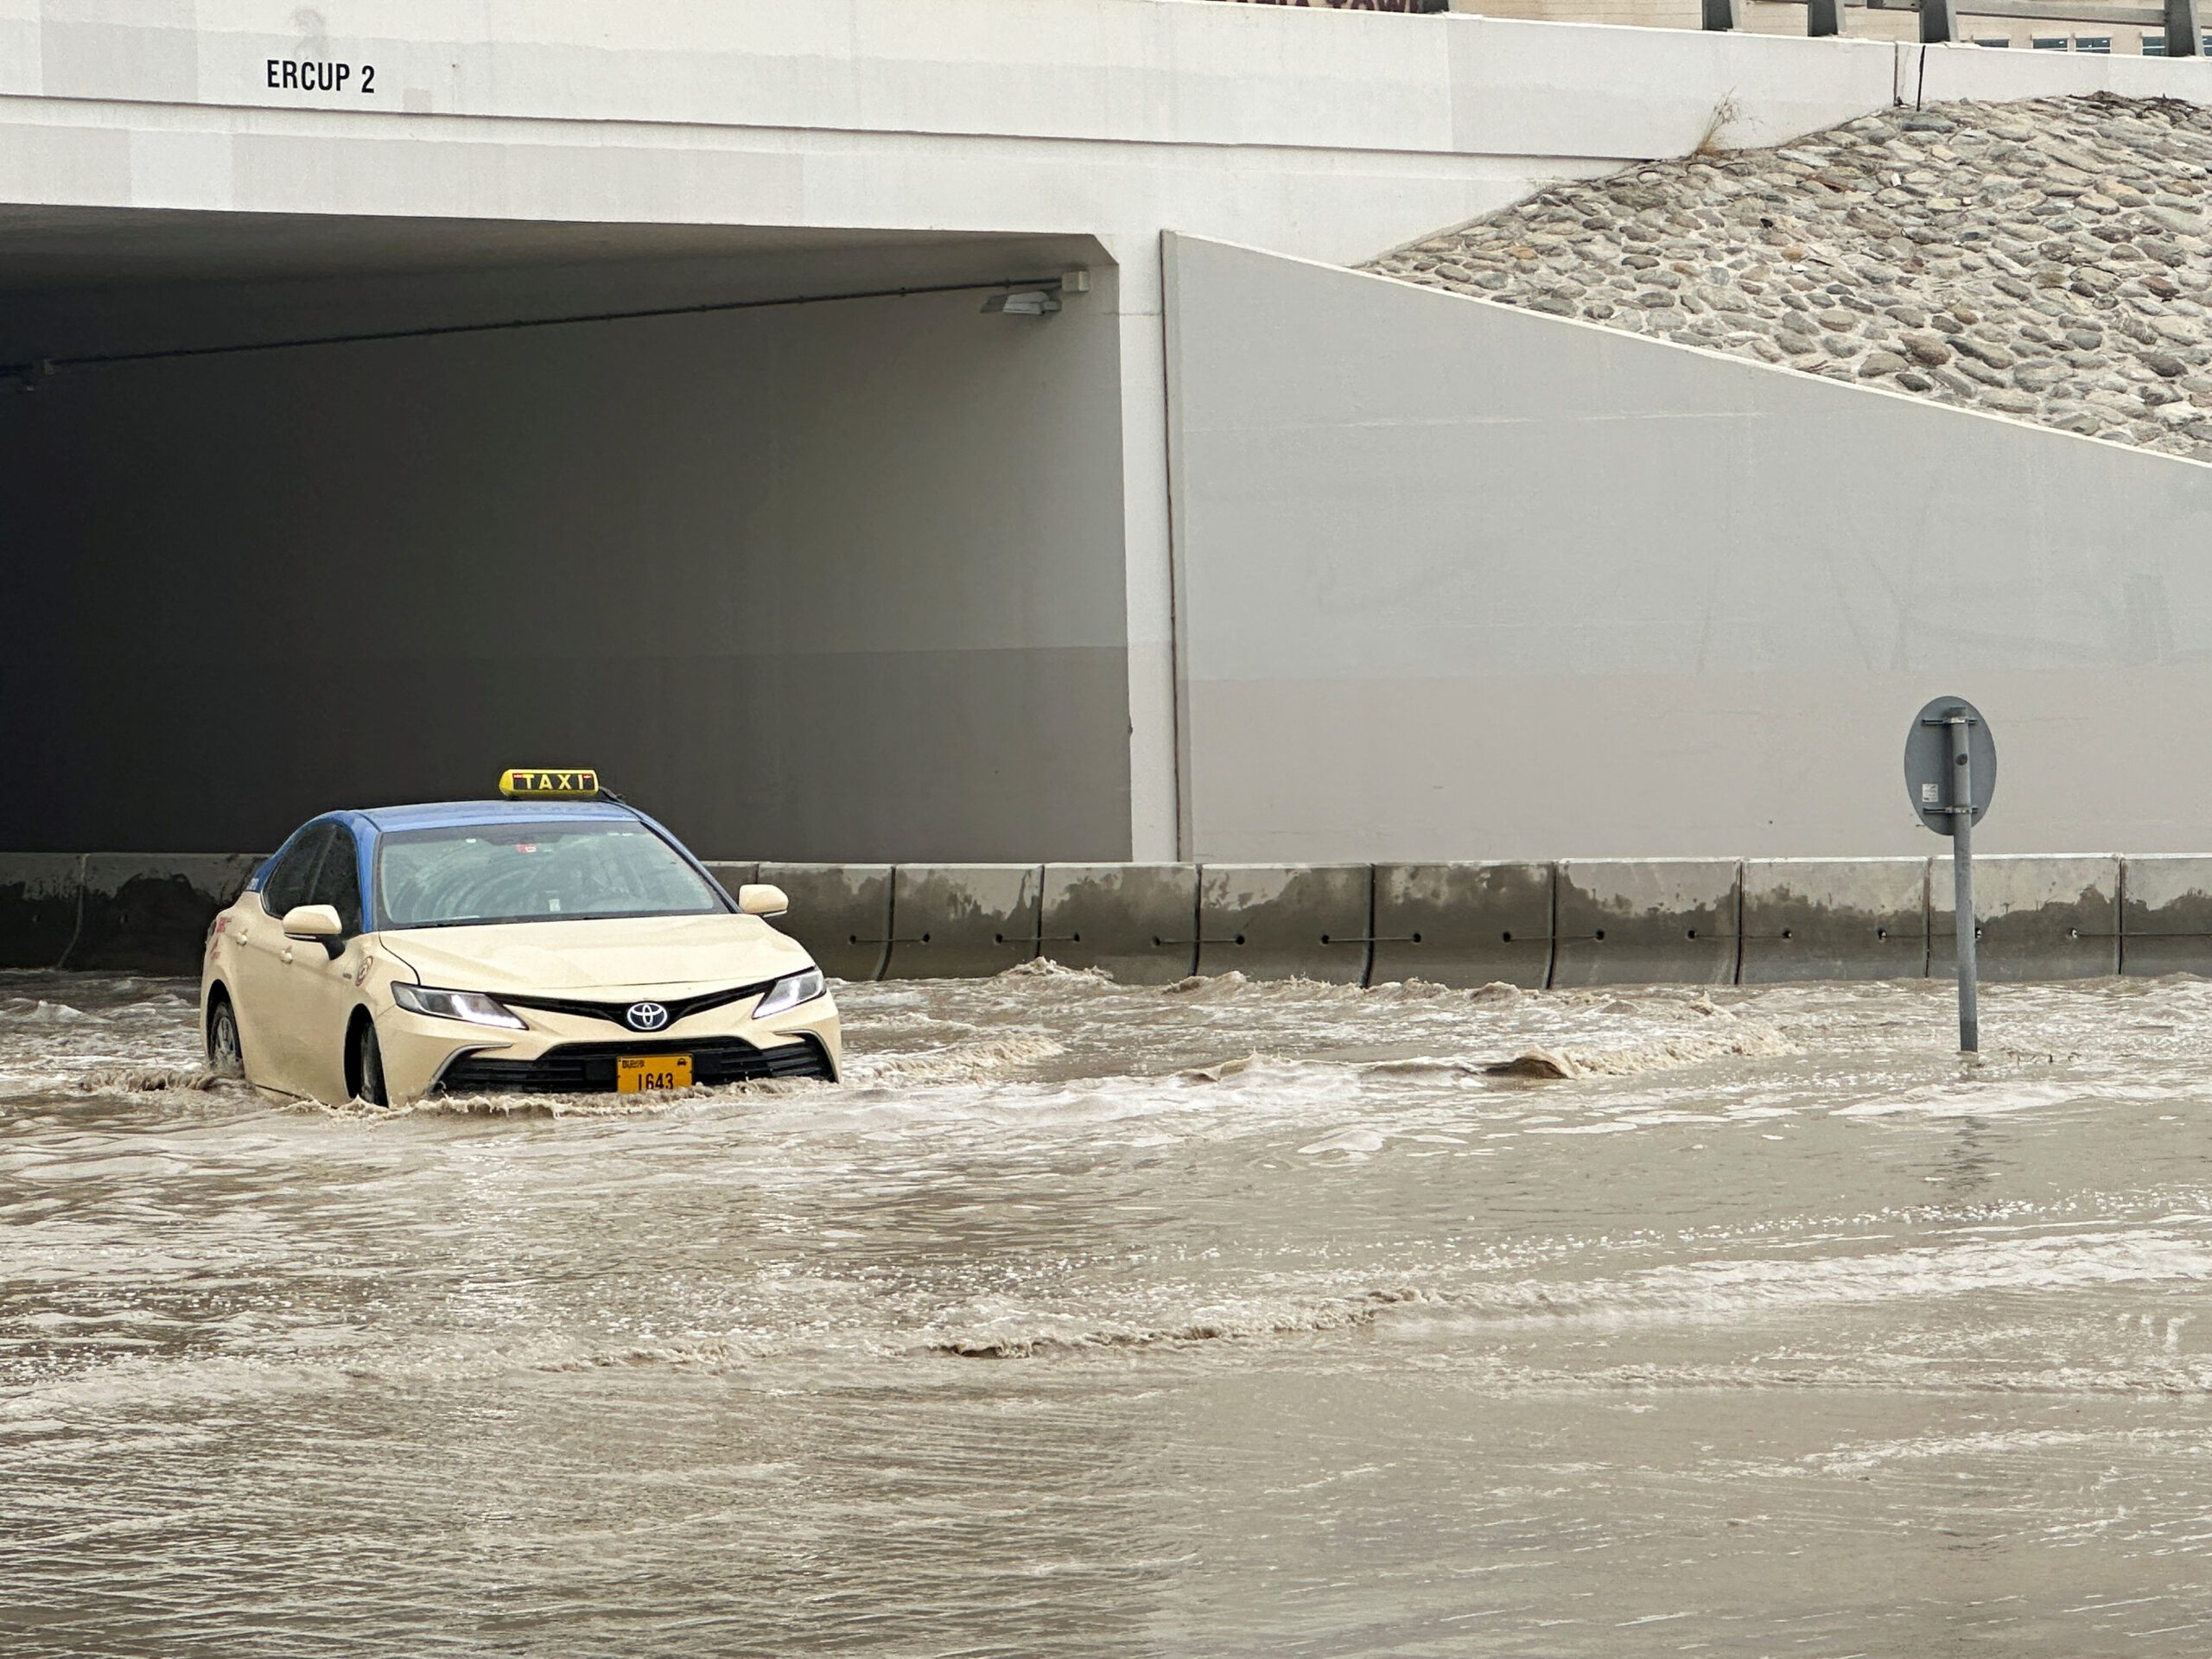 Taxi in UAE caught in flooding